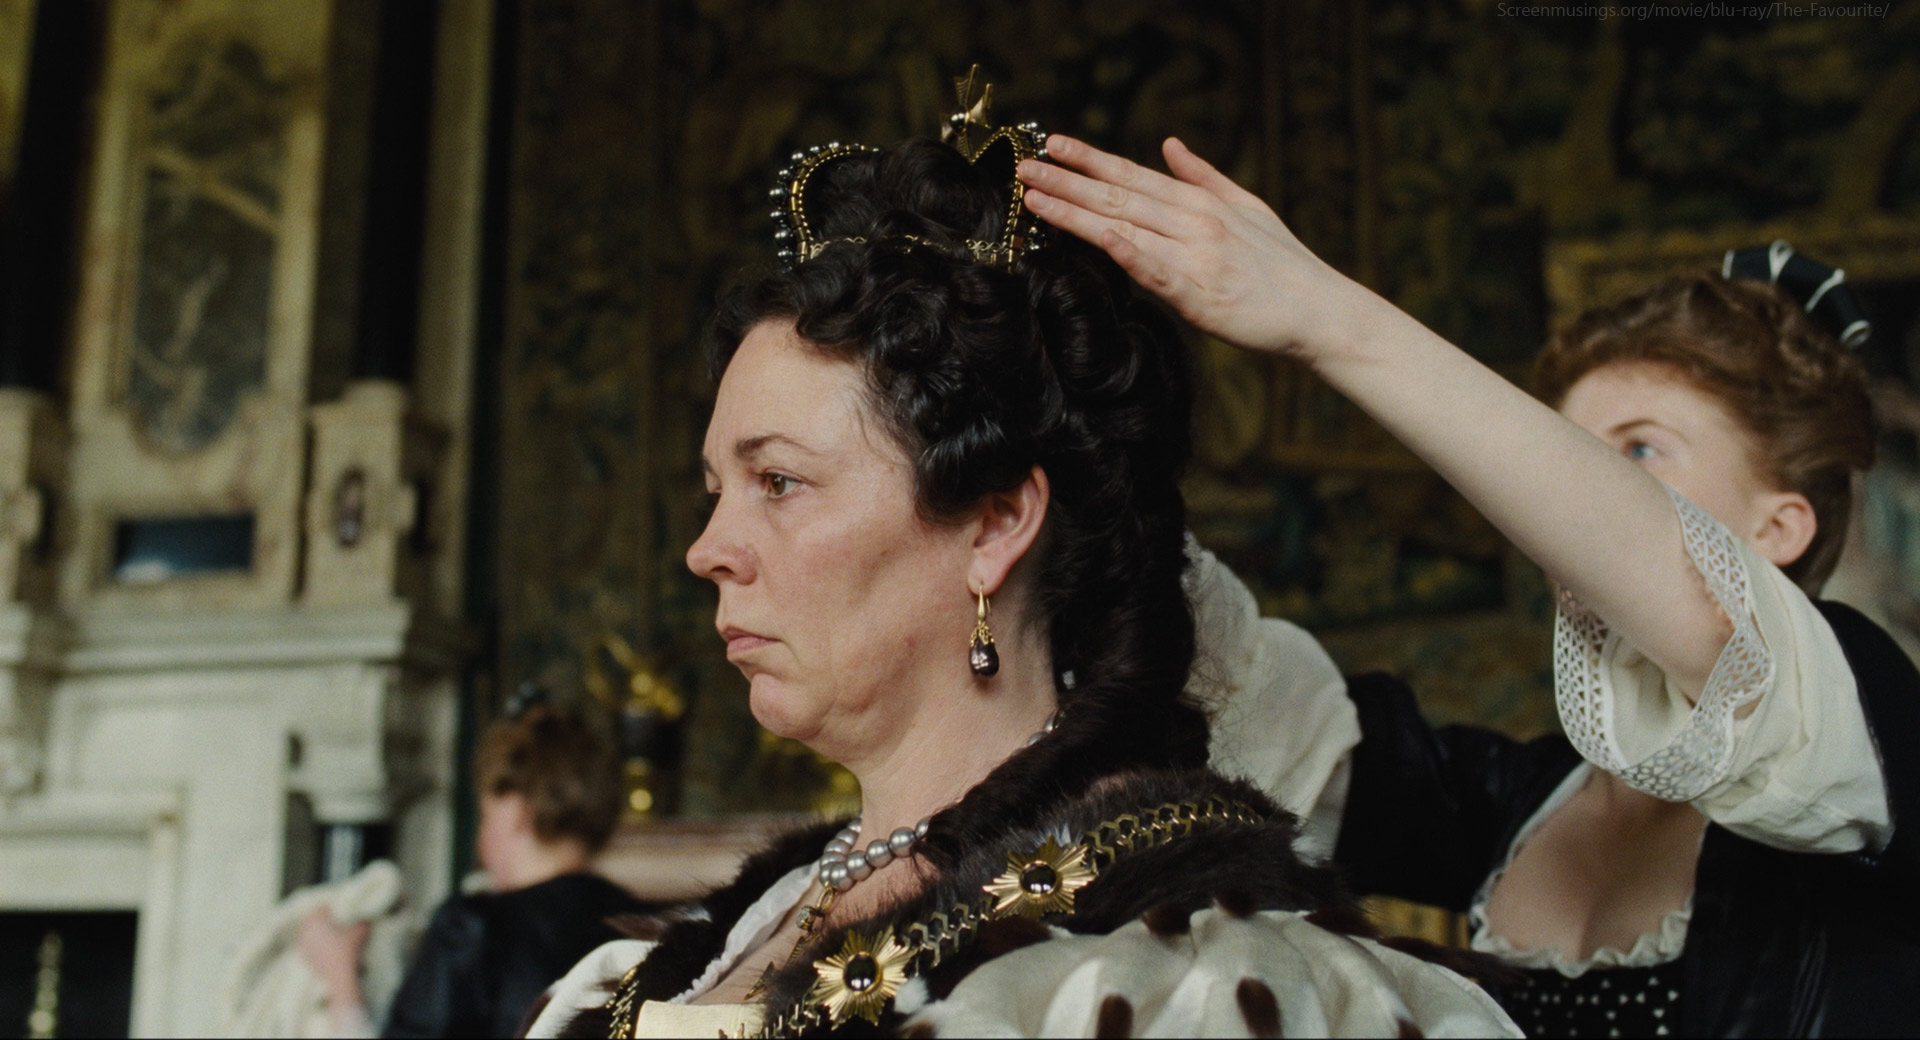 https://screenmusings.org/movie/blu-ray/The-Favourite/images/The-Favourite-003.jpg